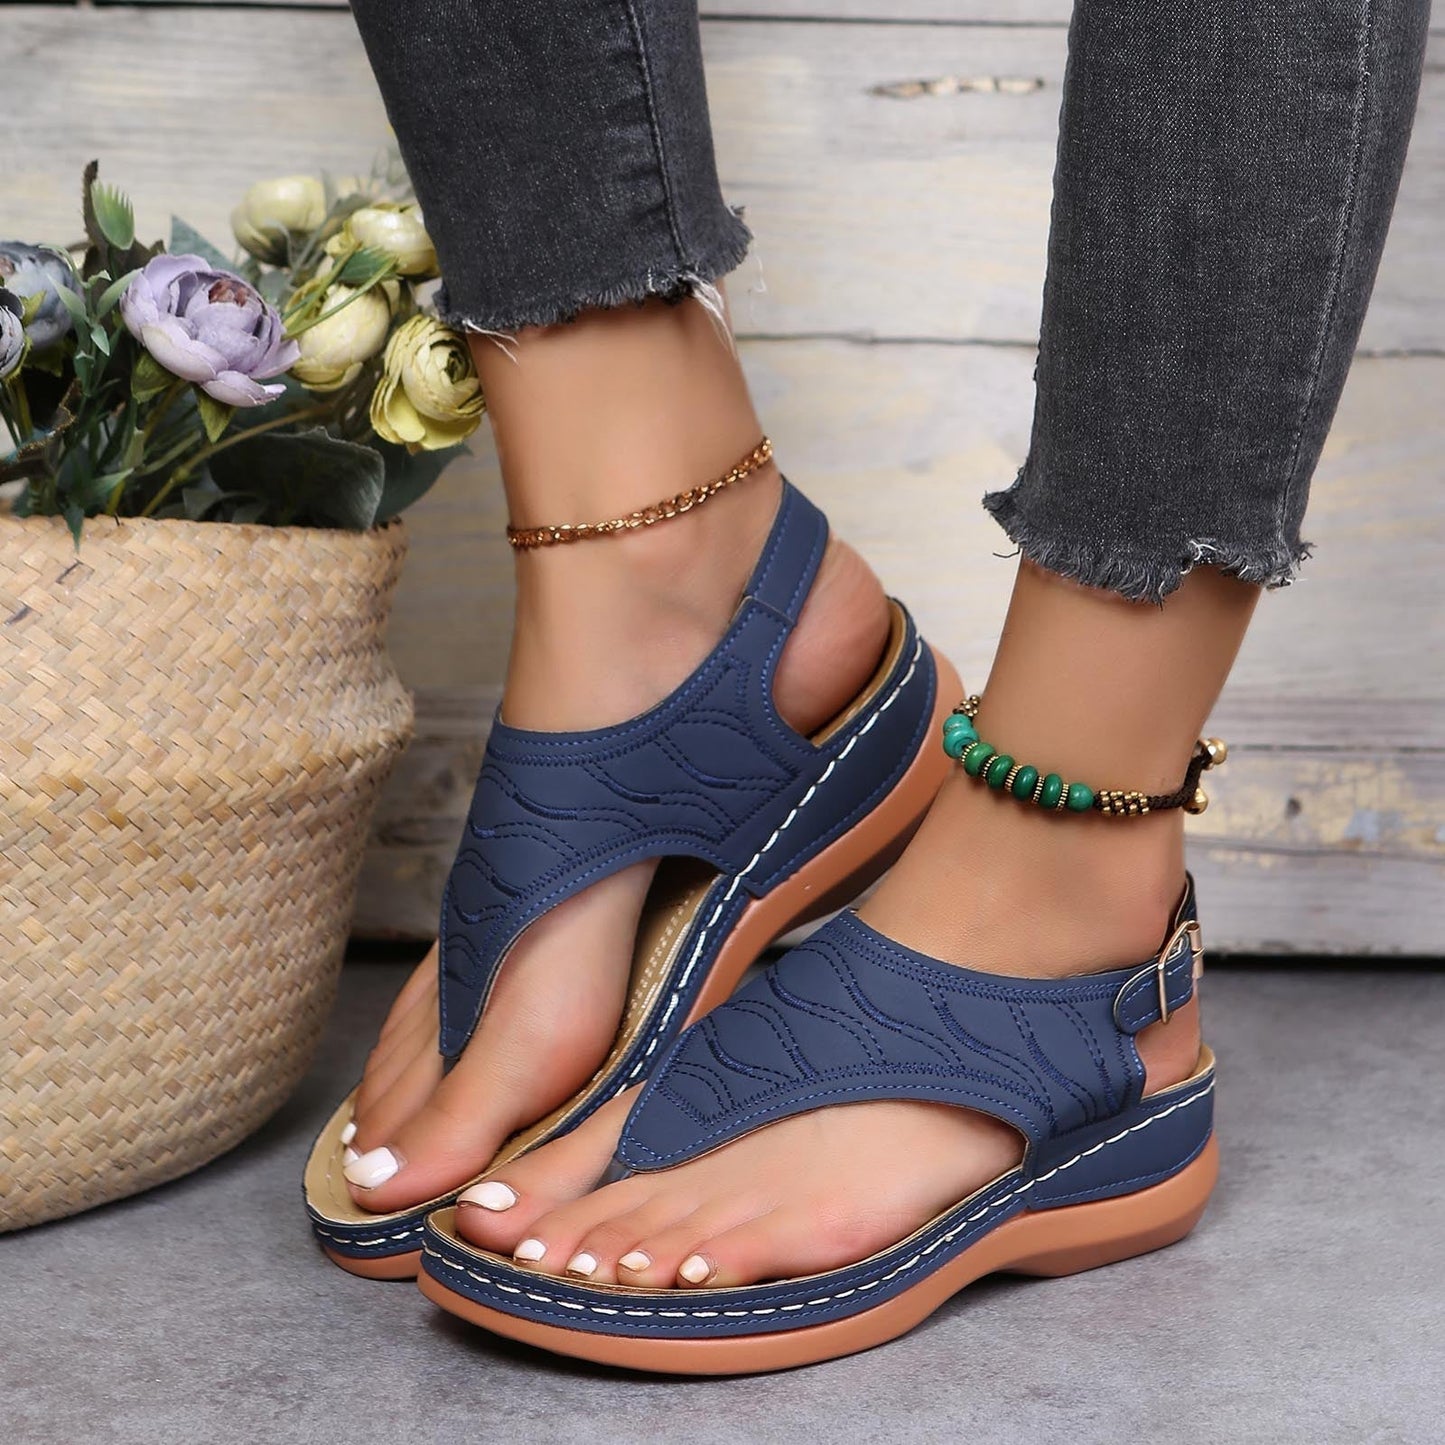 Else™ | Comfortable Sandals with Extra Support